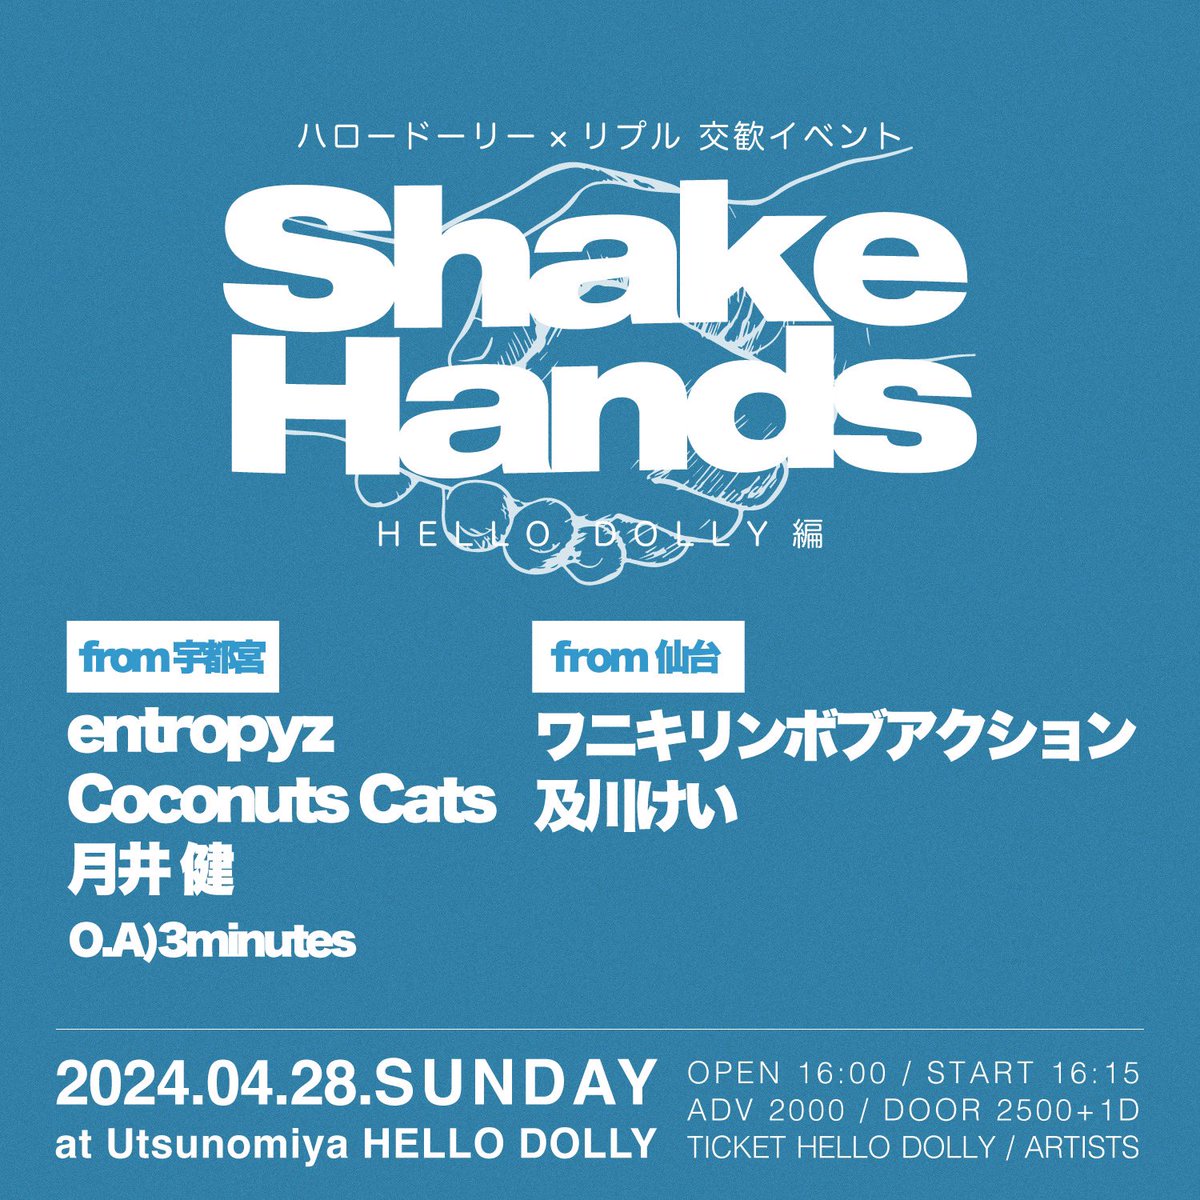 🤘TONIGHT🤘
2024.04.28.SUN
ハロードーリー×リプル 交歓イベント
【Shake Hands】HELLO DOLLY編

仙台 : ワニキリンボブアクション / 及川けい
宇都宮 : entropyz / Coconuts Cats / 月井 健
O.A 3minutes

OP 16:00 / ST 16:15
DOOR ¥2500+1D 600